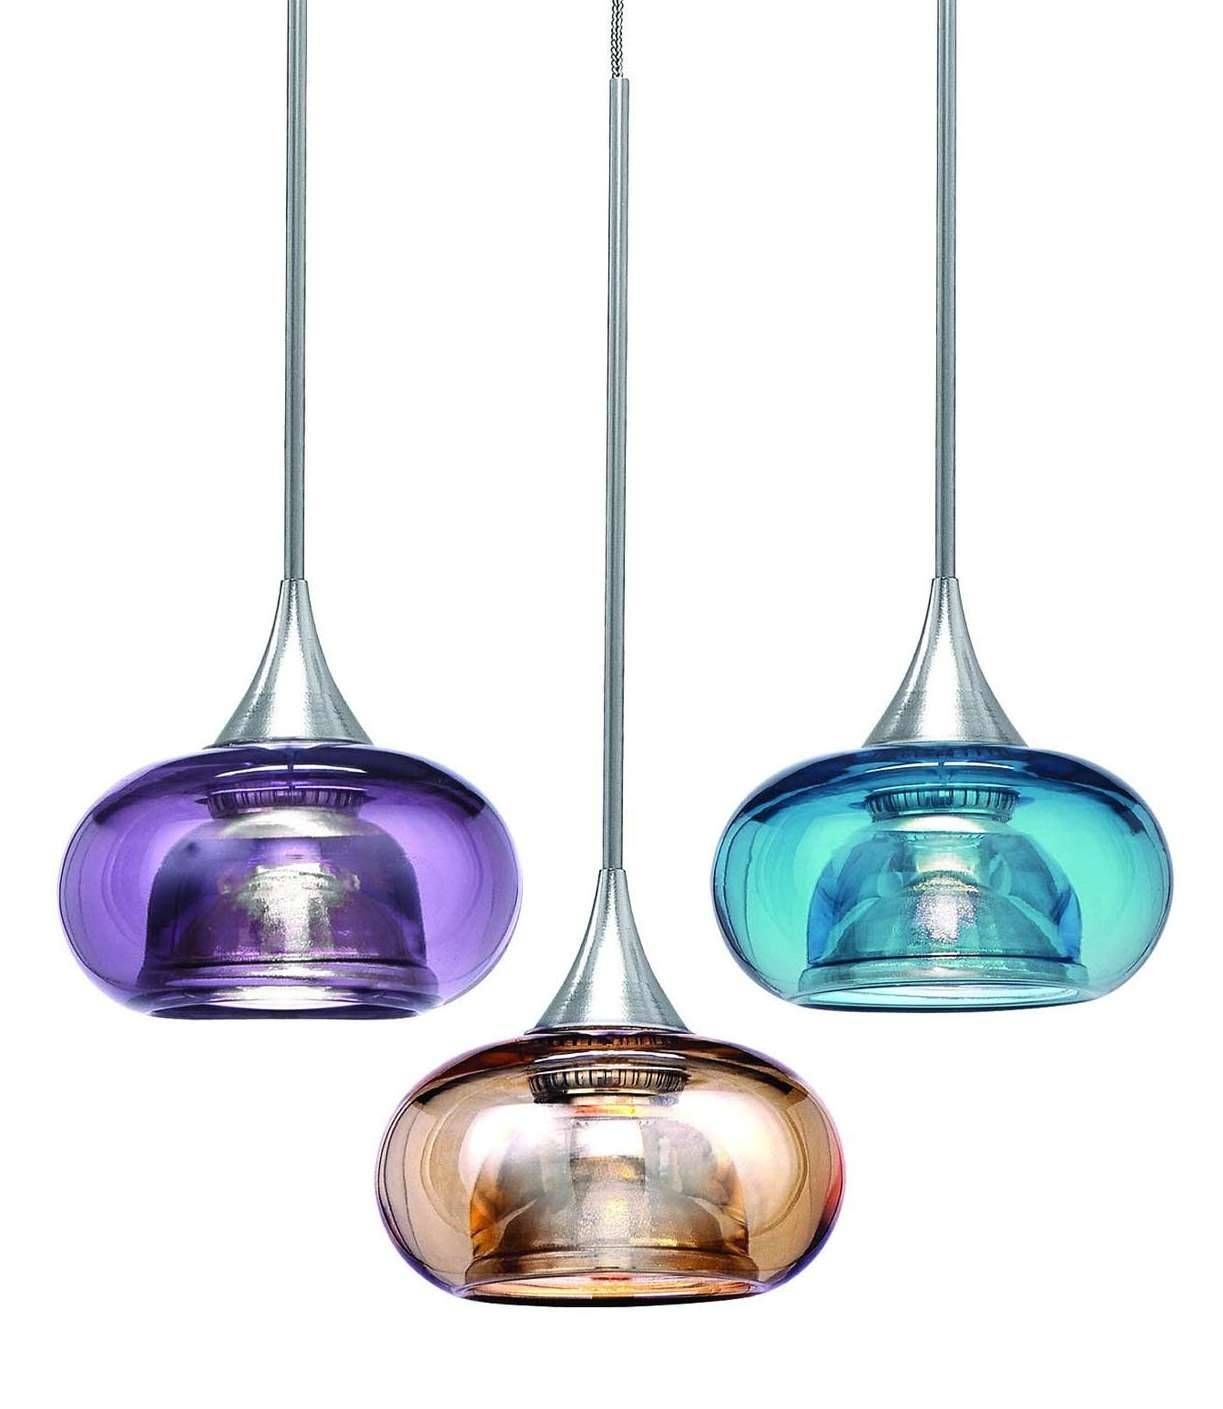 Unique Colored Glass Pendant Lights 68 On Large Pendant Lighting Within Unique Glass Pendant Lights (View 14 of 15)